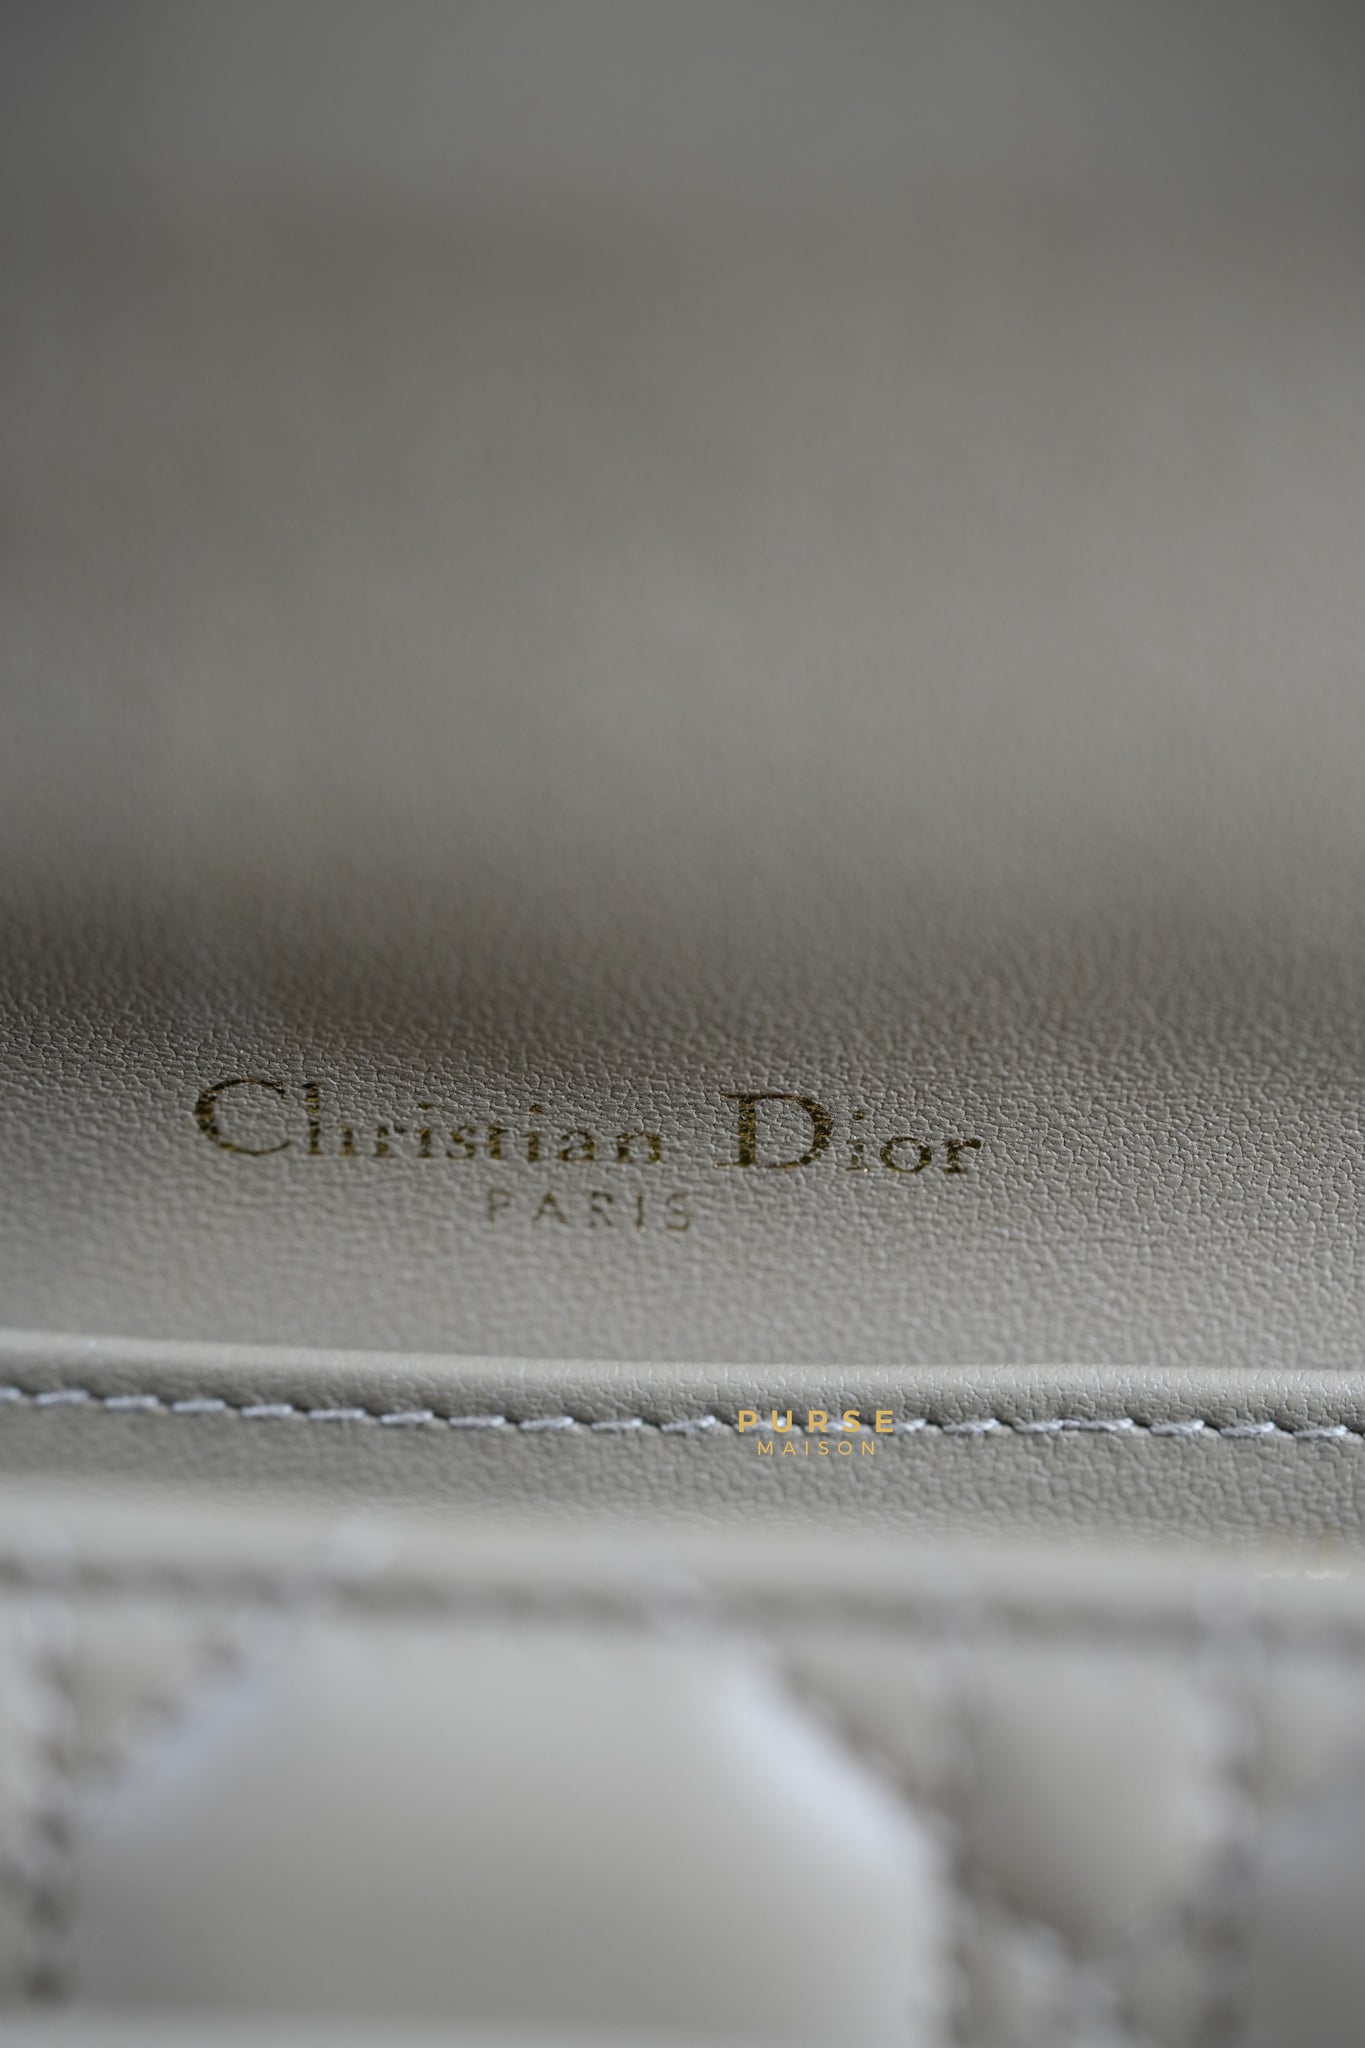 Lady Dior Chain Pouch in Warm Taupe Lambskin Leather | Purse Maison Luxury Bags Shop